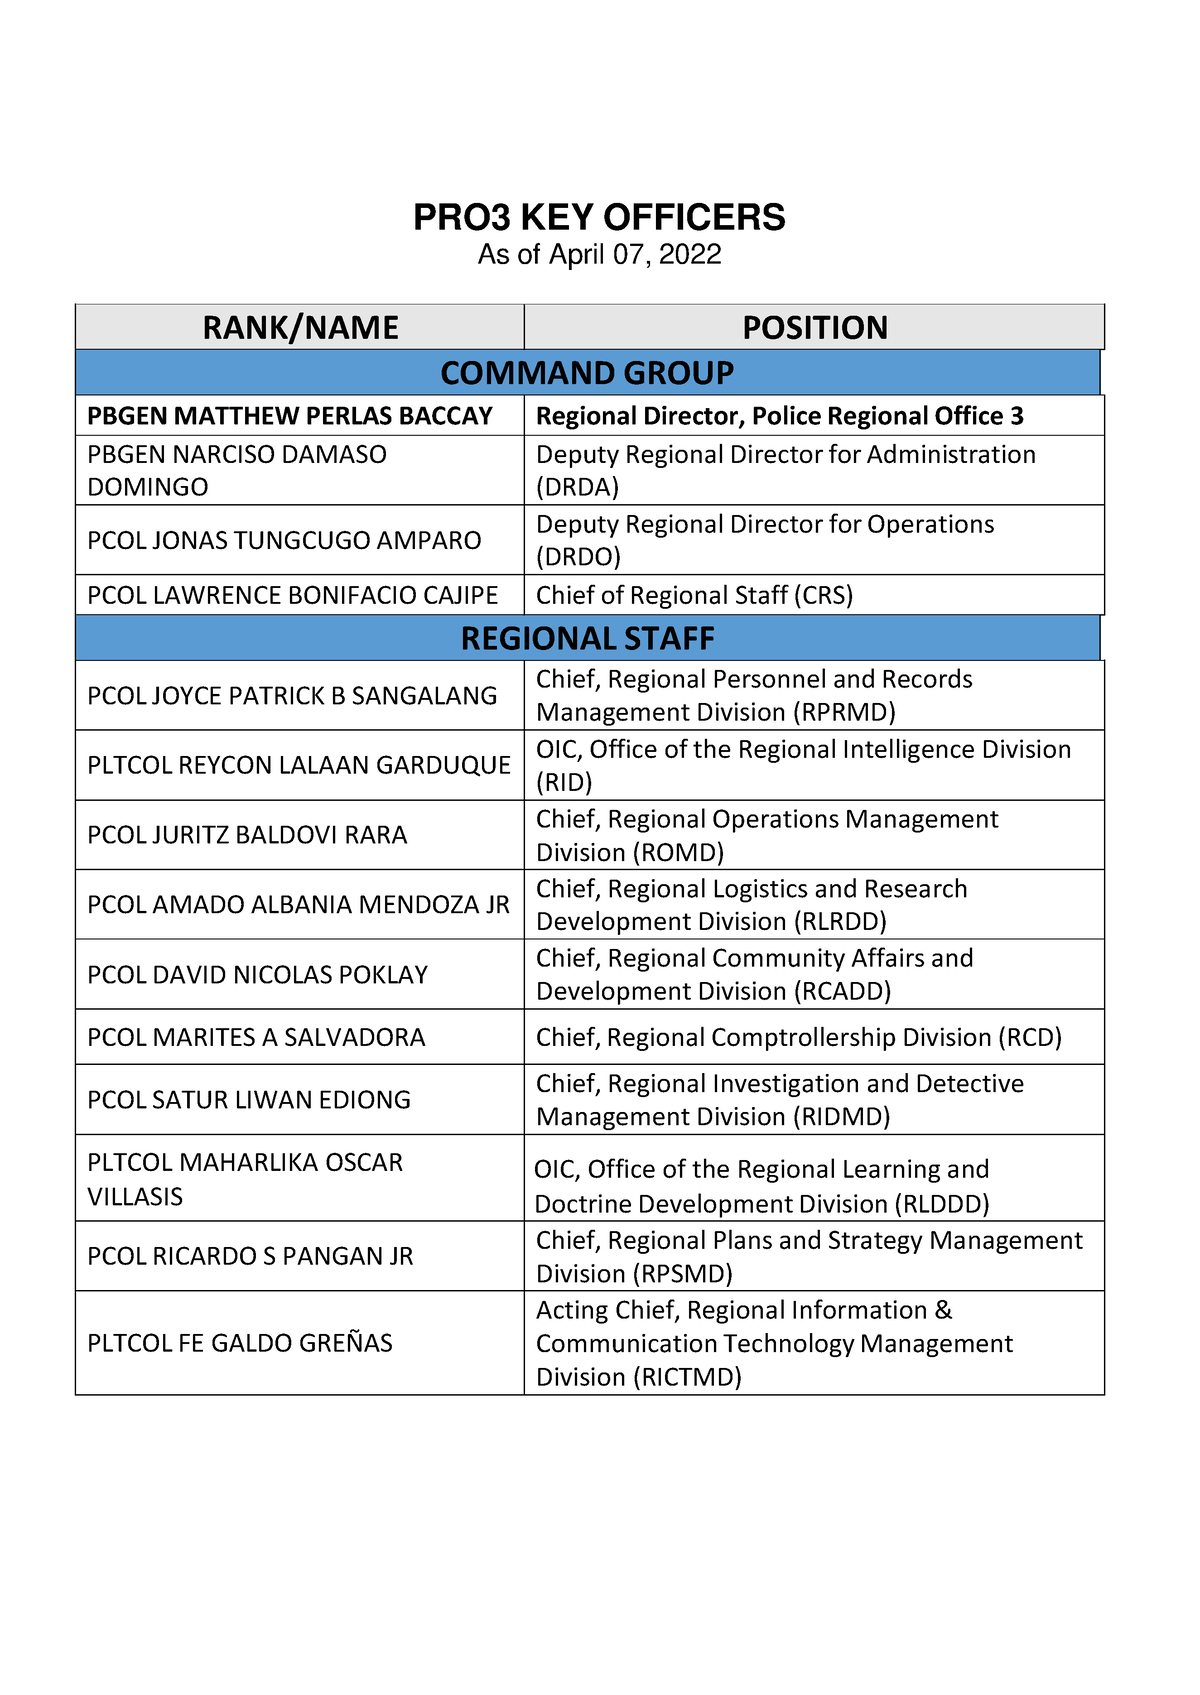 PRO3 Key Officers May 2022 PRO3 KEY OFFICERS As of April 07, 2022